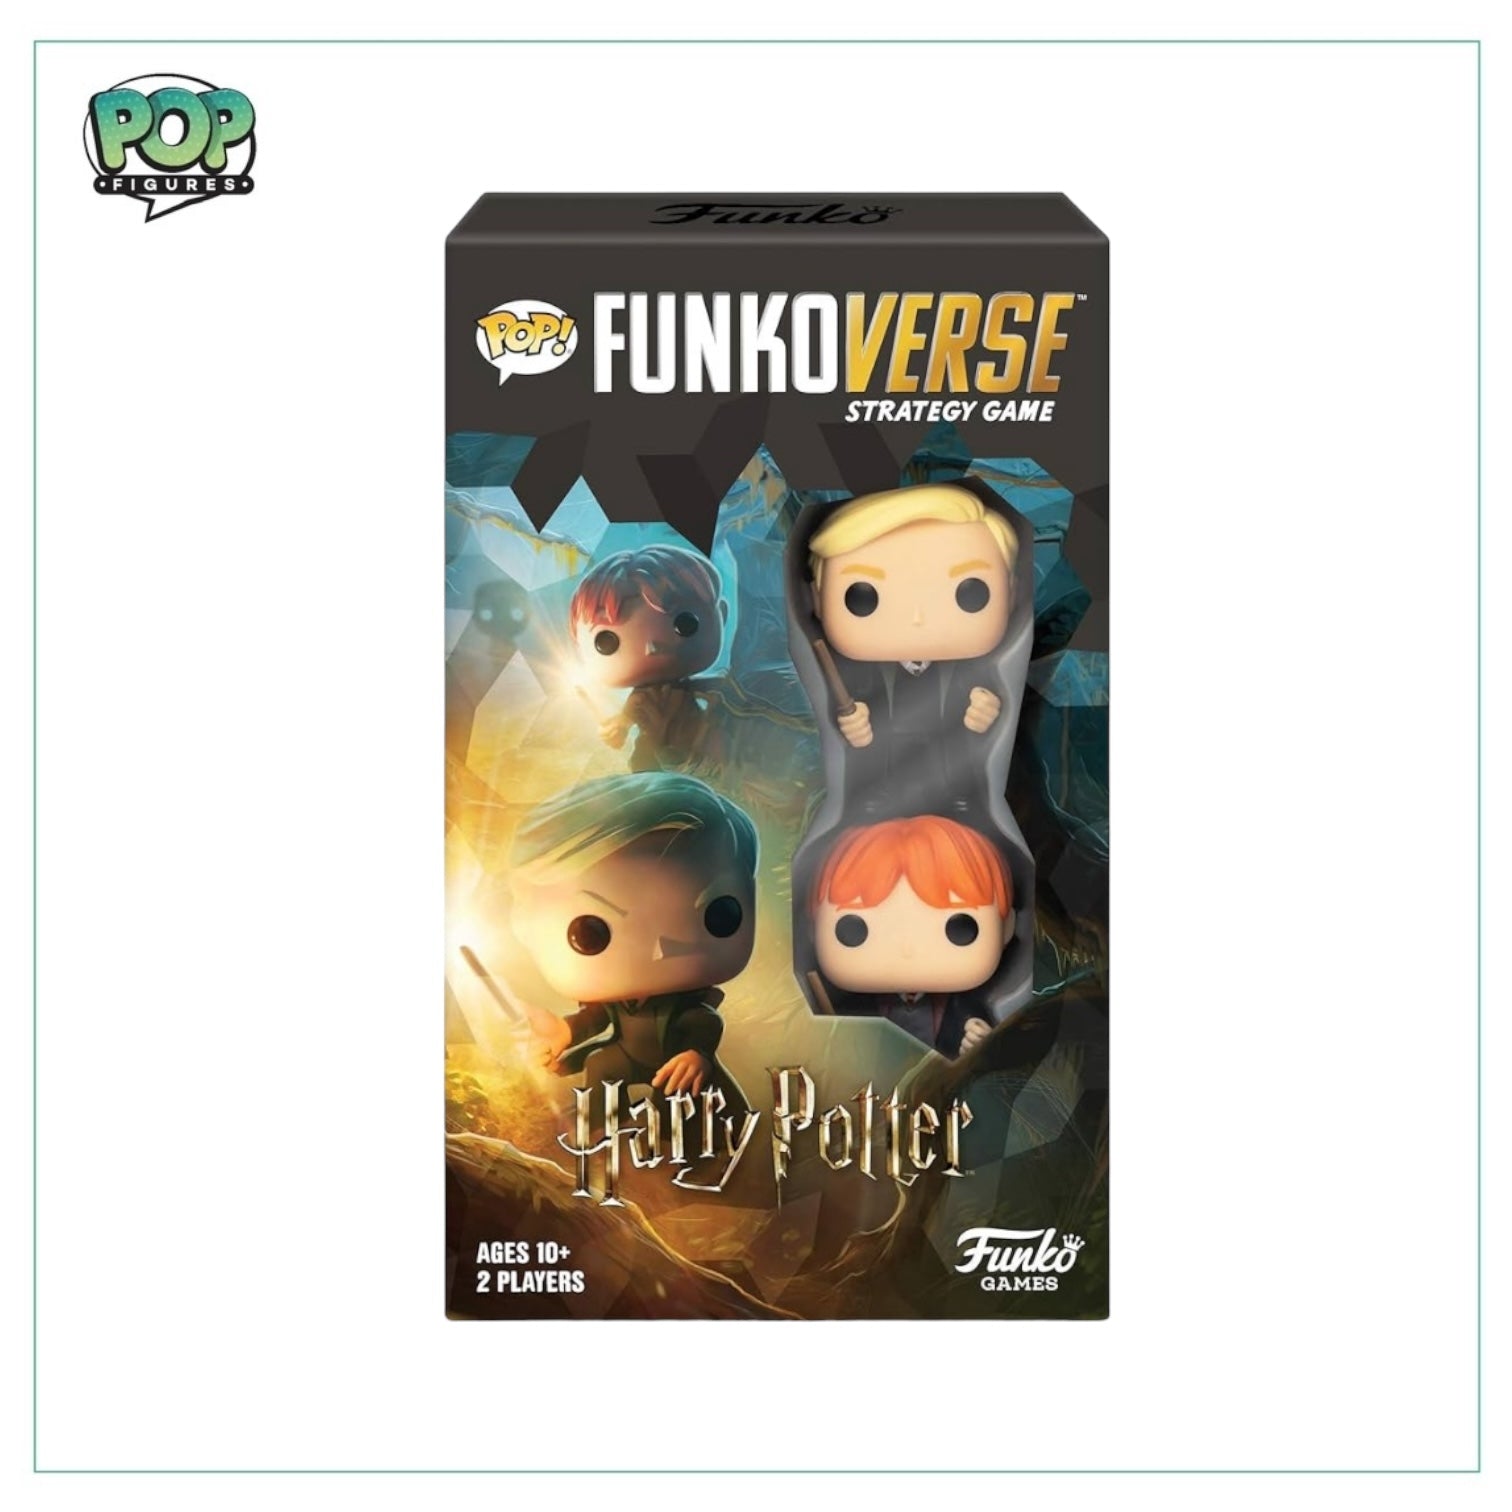 Harry Potter 2 Player Funko Verse Strategy Game